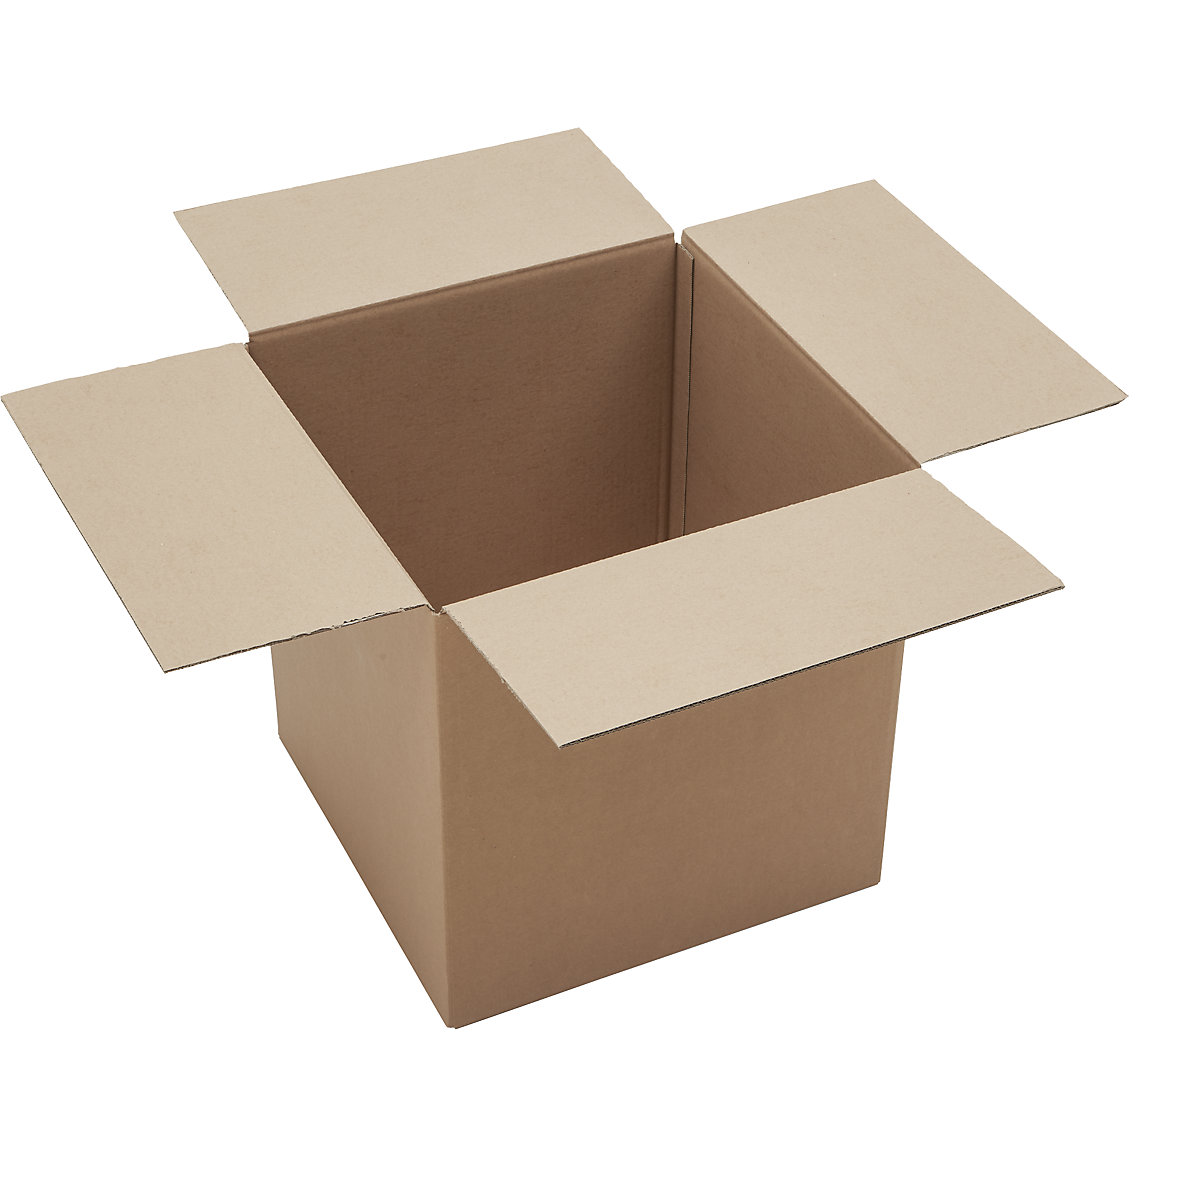 Corrugated cardboard folding boxes, FEFCO 0201, double fluted, pack of 50, internal dimensions 375 x 375 x 400 mm-2